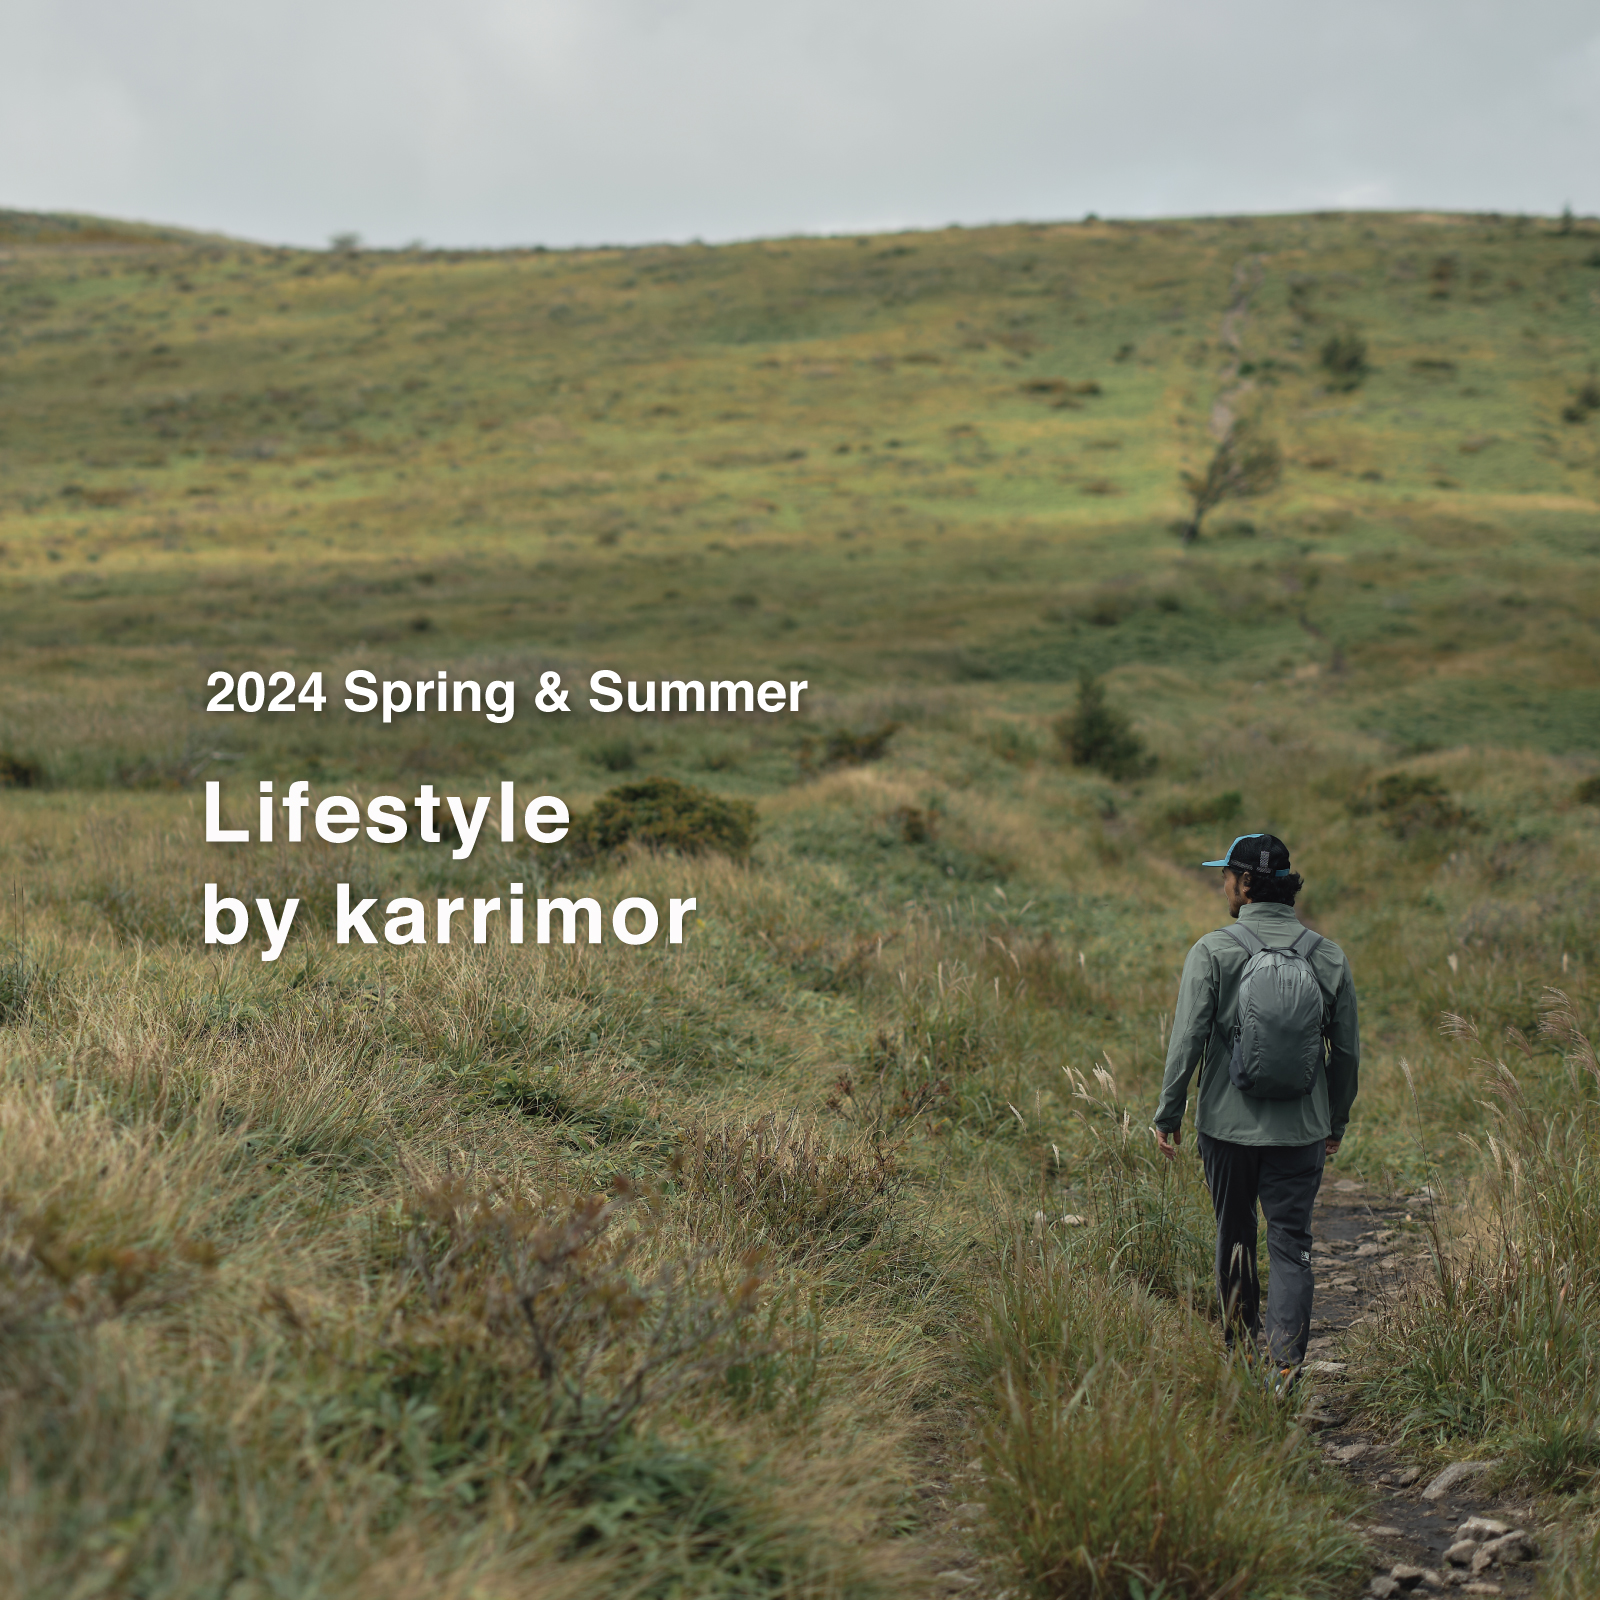 2024 S/S Lifestyle by karrimor